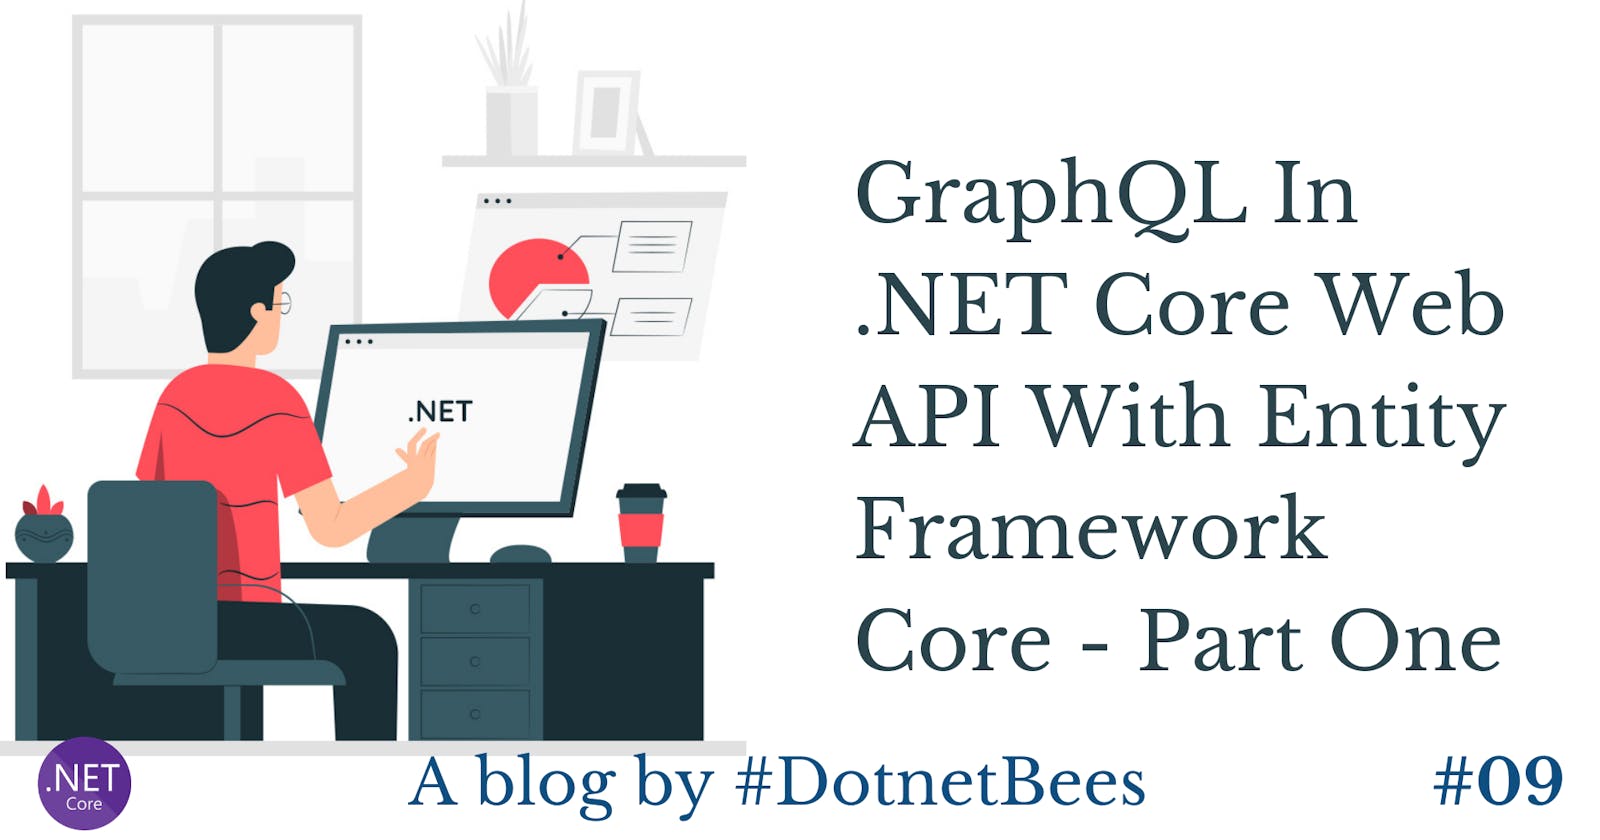 GraphQL In .NET Core Web API With Entity Framework Core - Part One